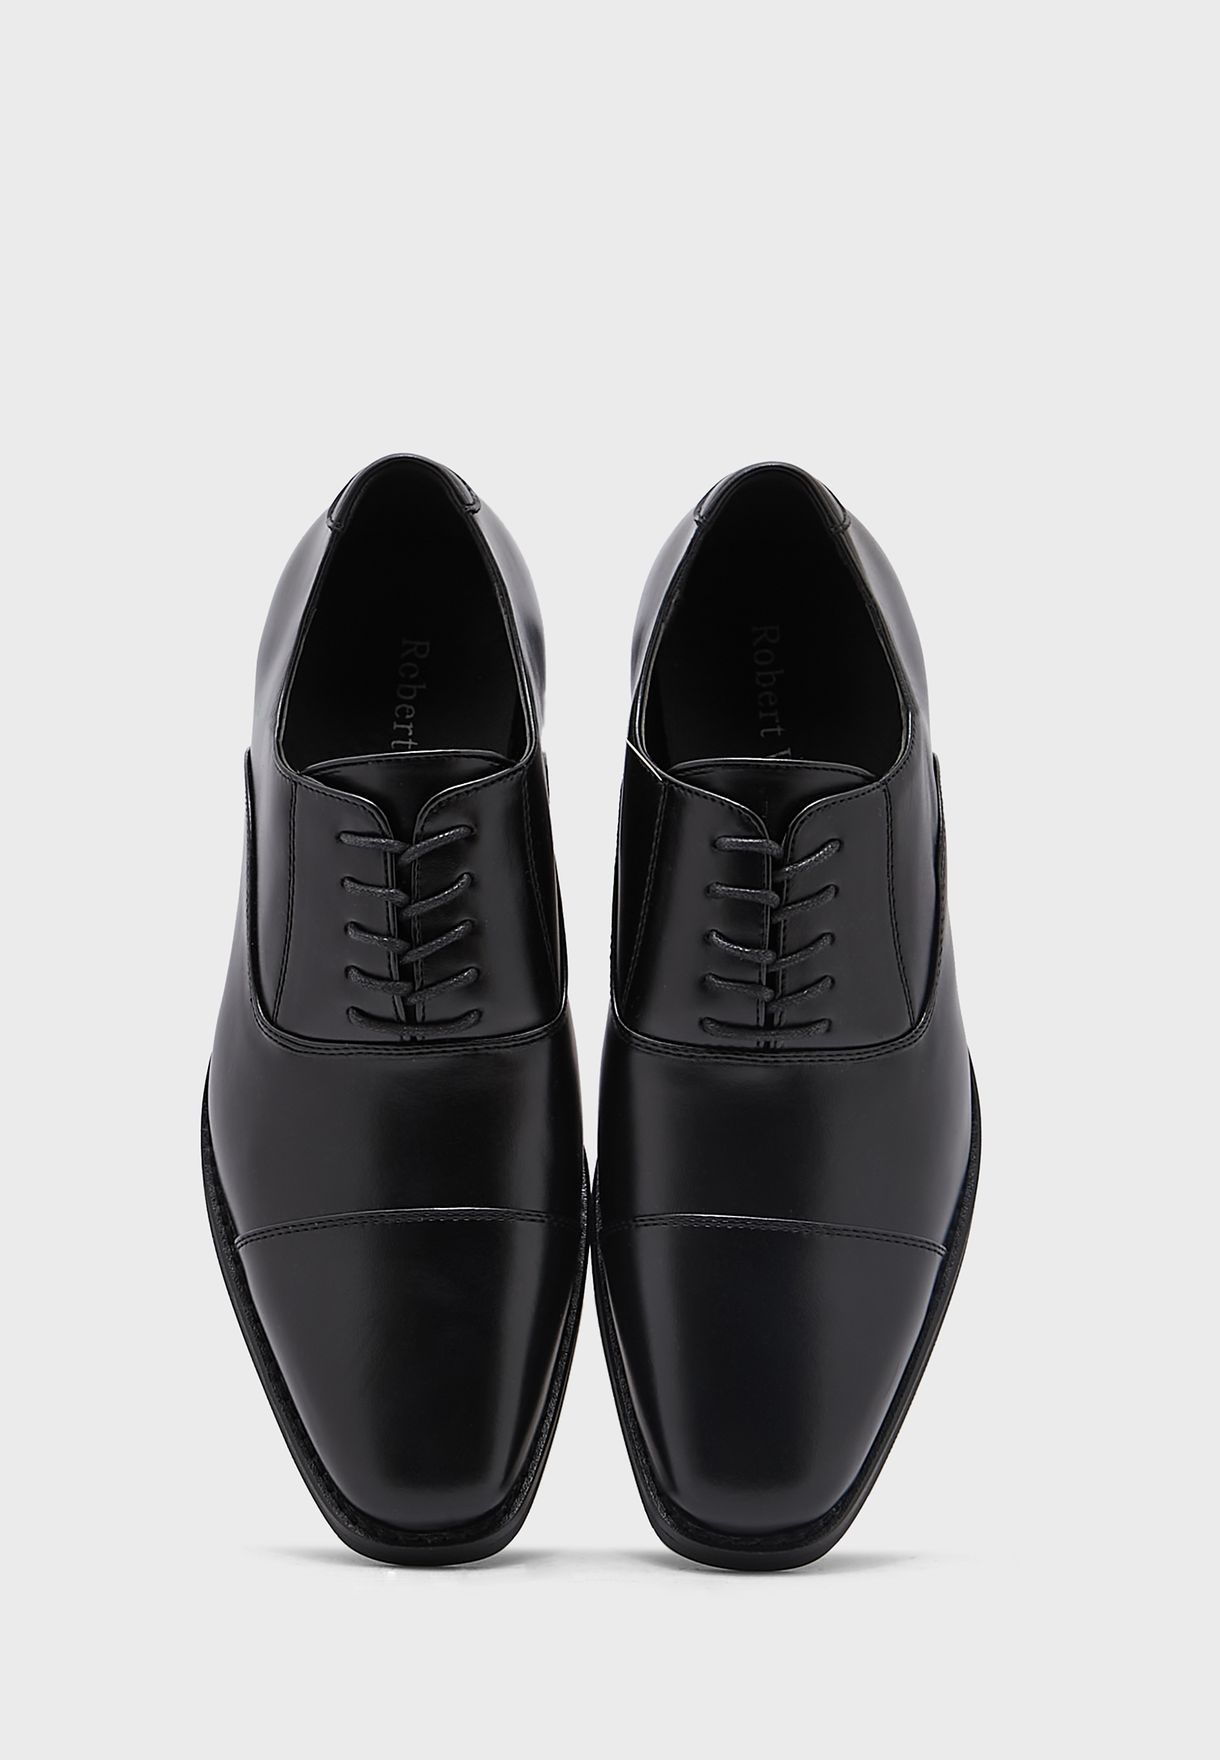 Welted Formal Lace Ups